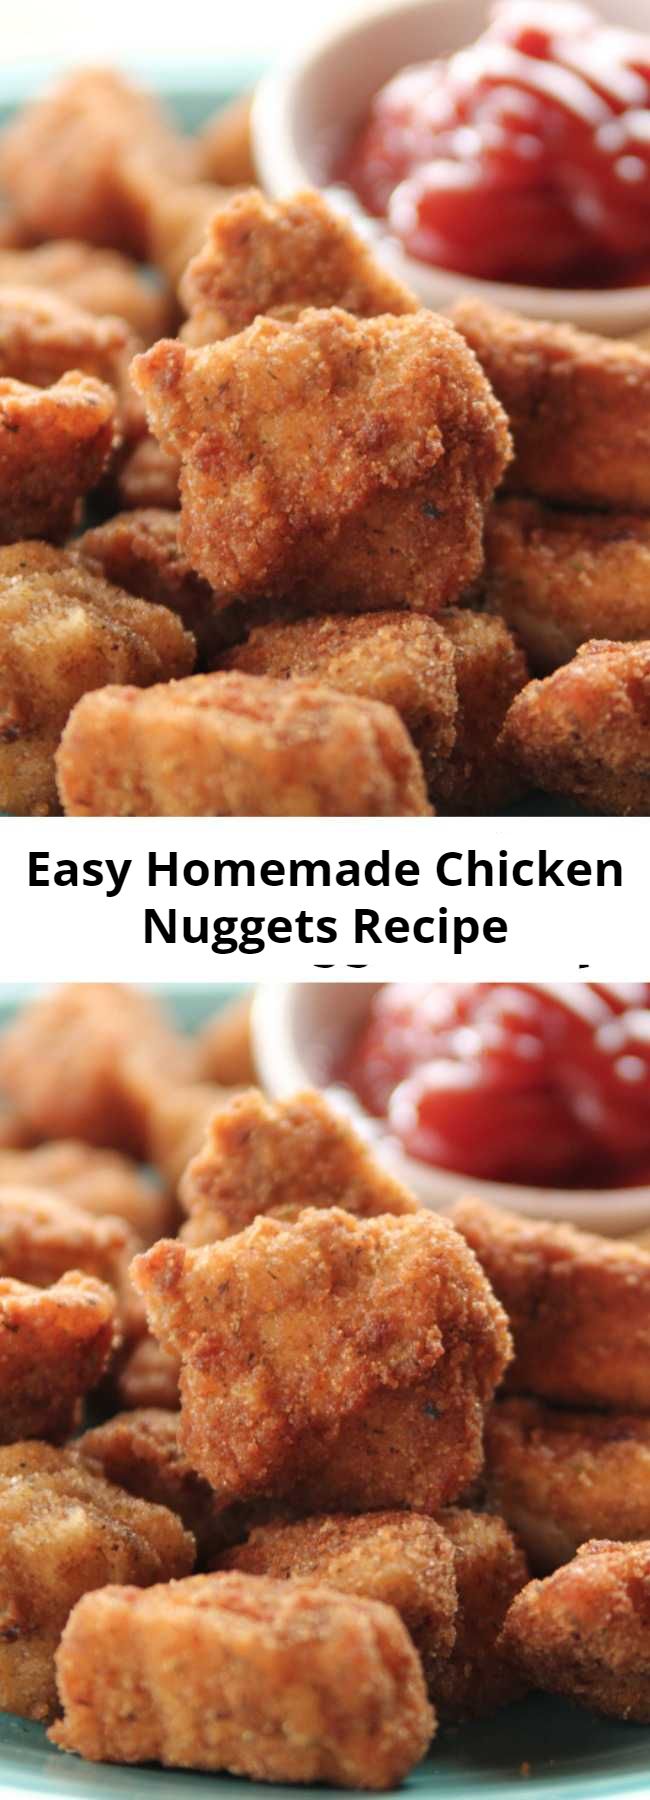 Easy Homemade Chicken Nuggets Recipe - Super easy to make and even more fun to eat!